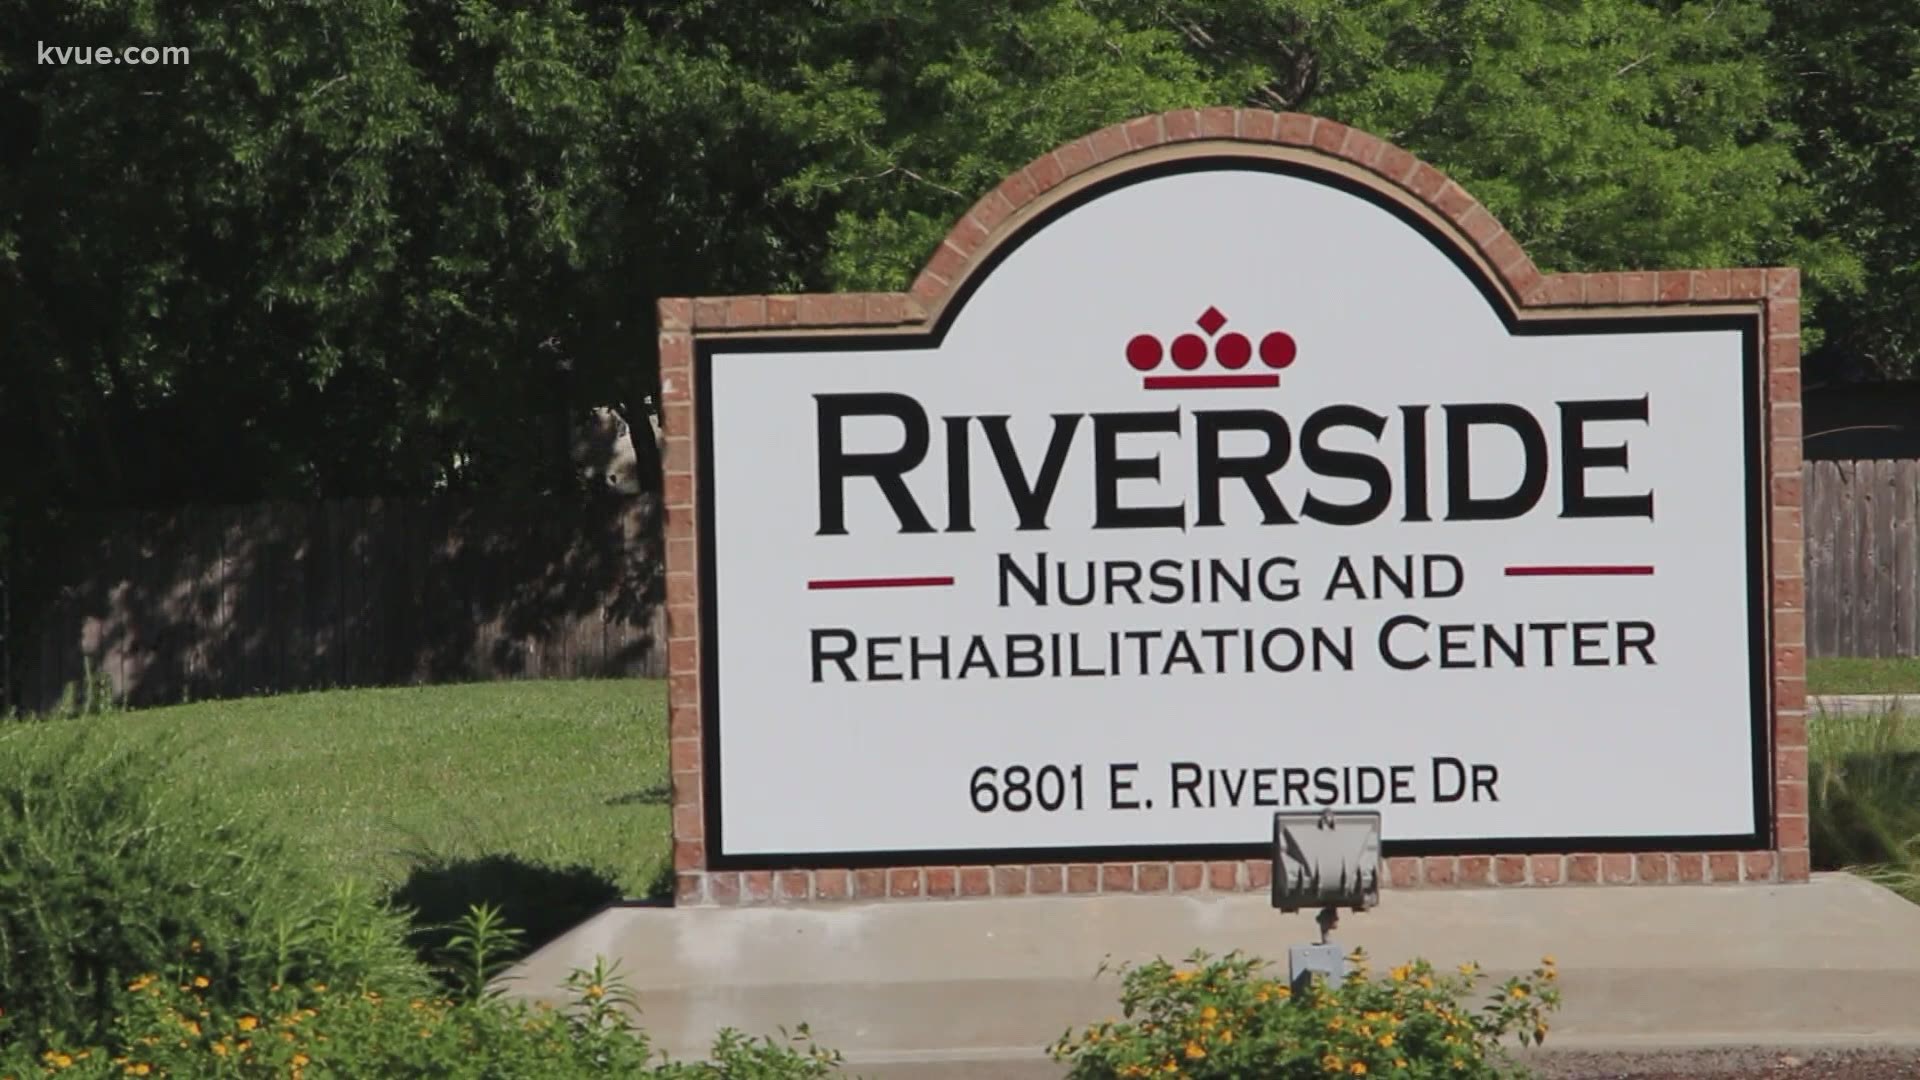 As COVID-19 spread in Texas nursing homes, the KVUE Defenders found some facilities violated disease control standards.